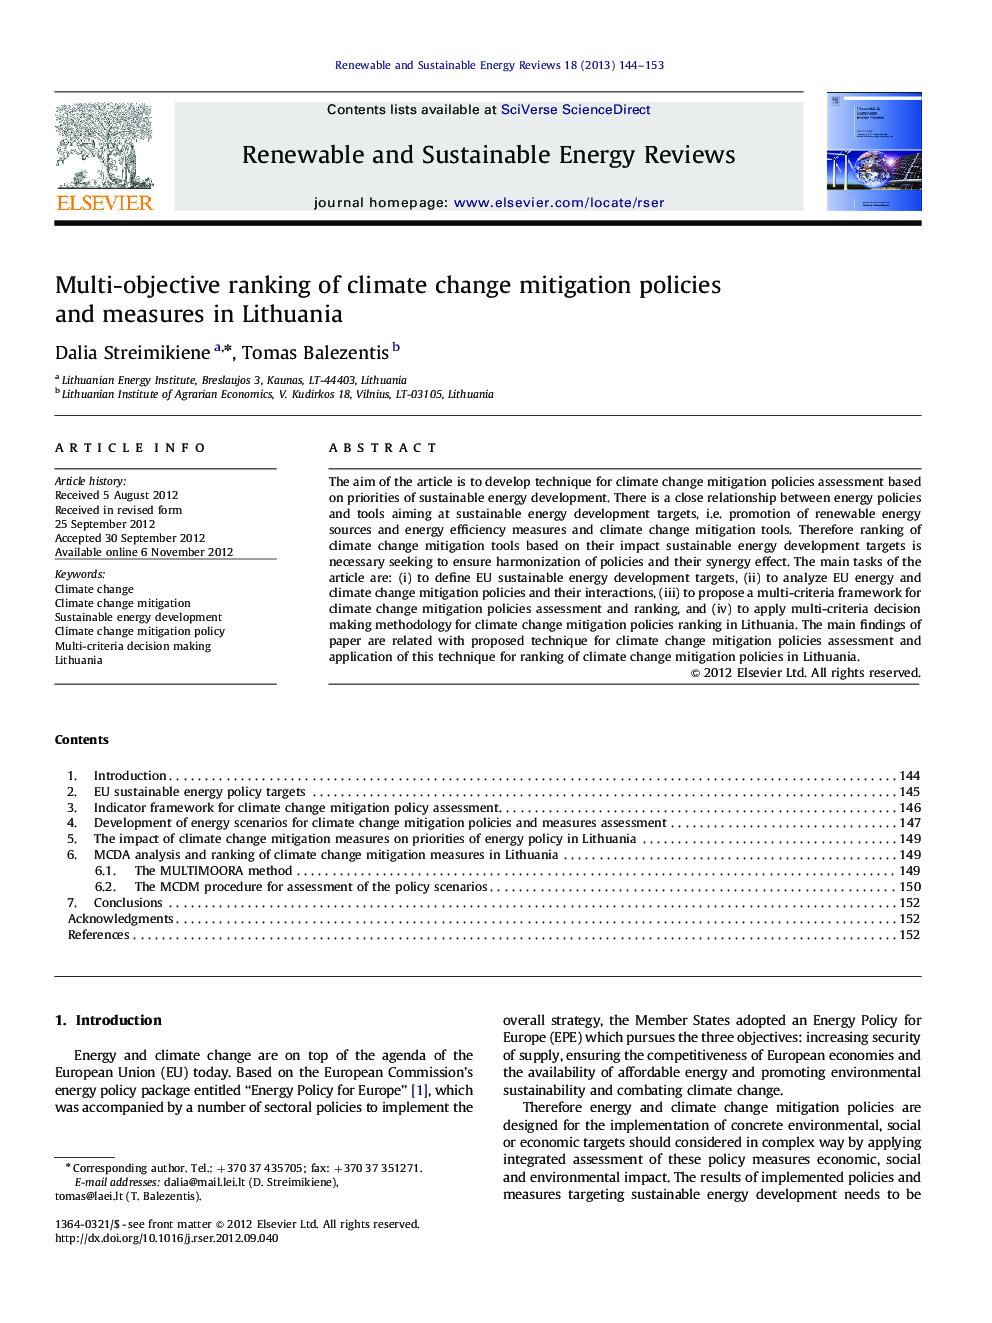 Multi-objective ranking of climate change mitigation policies and measures in Lithuania